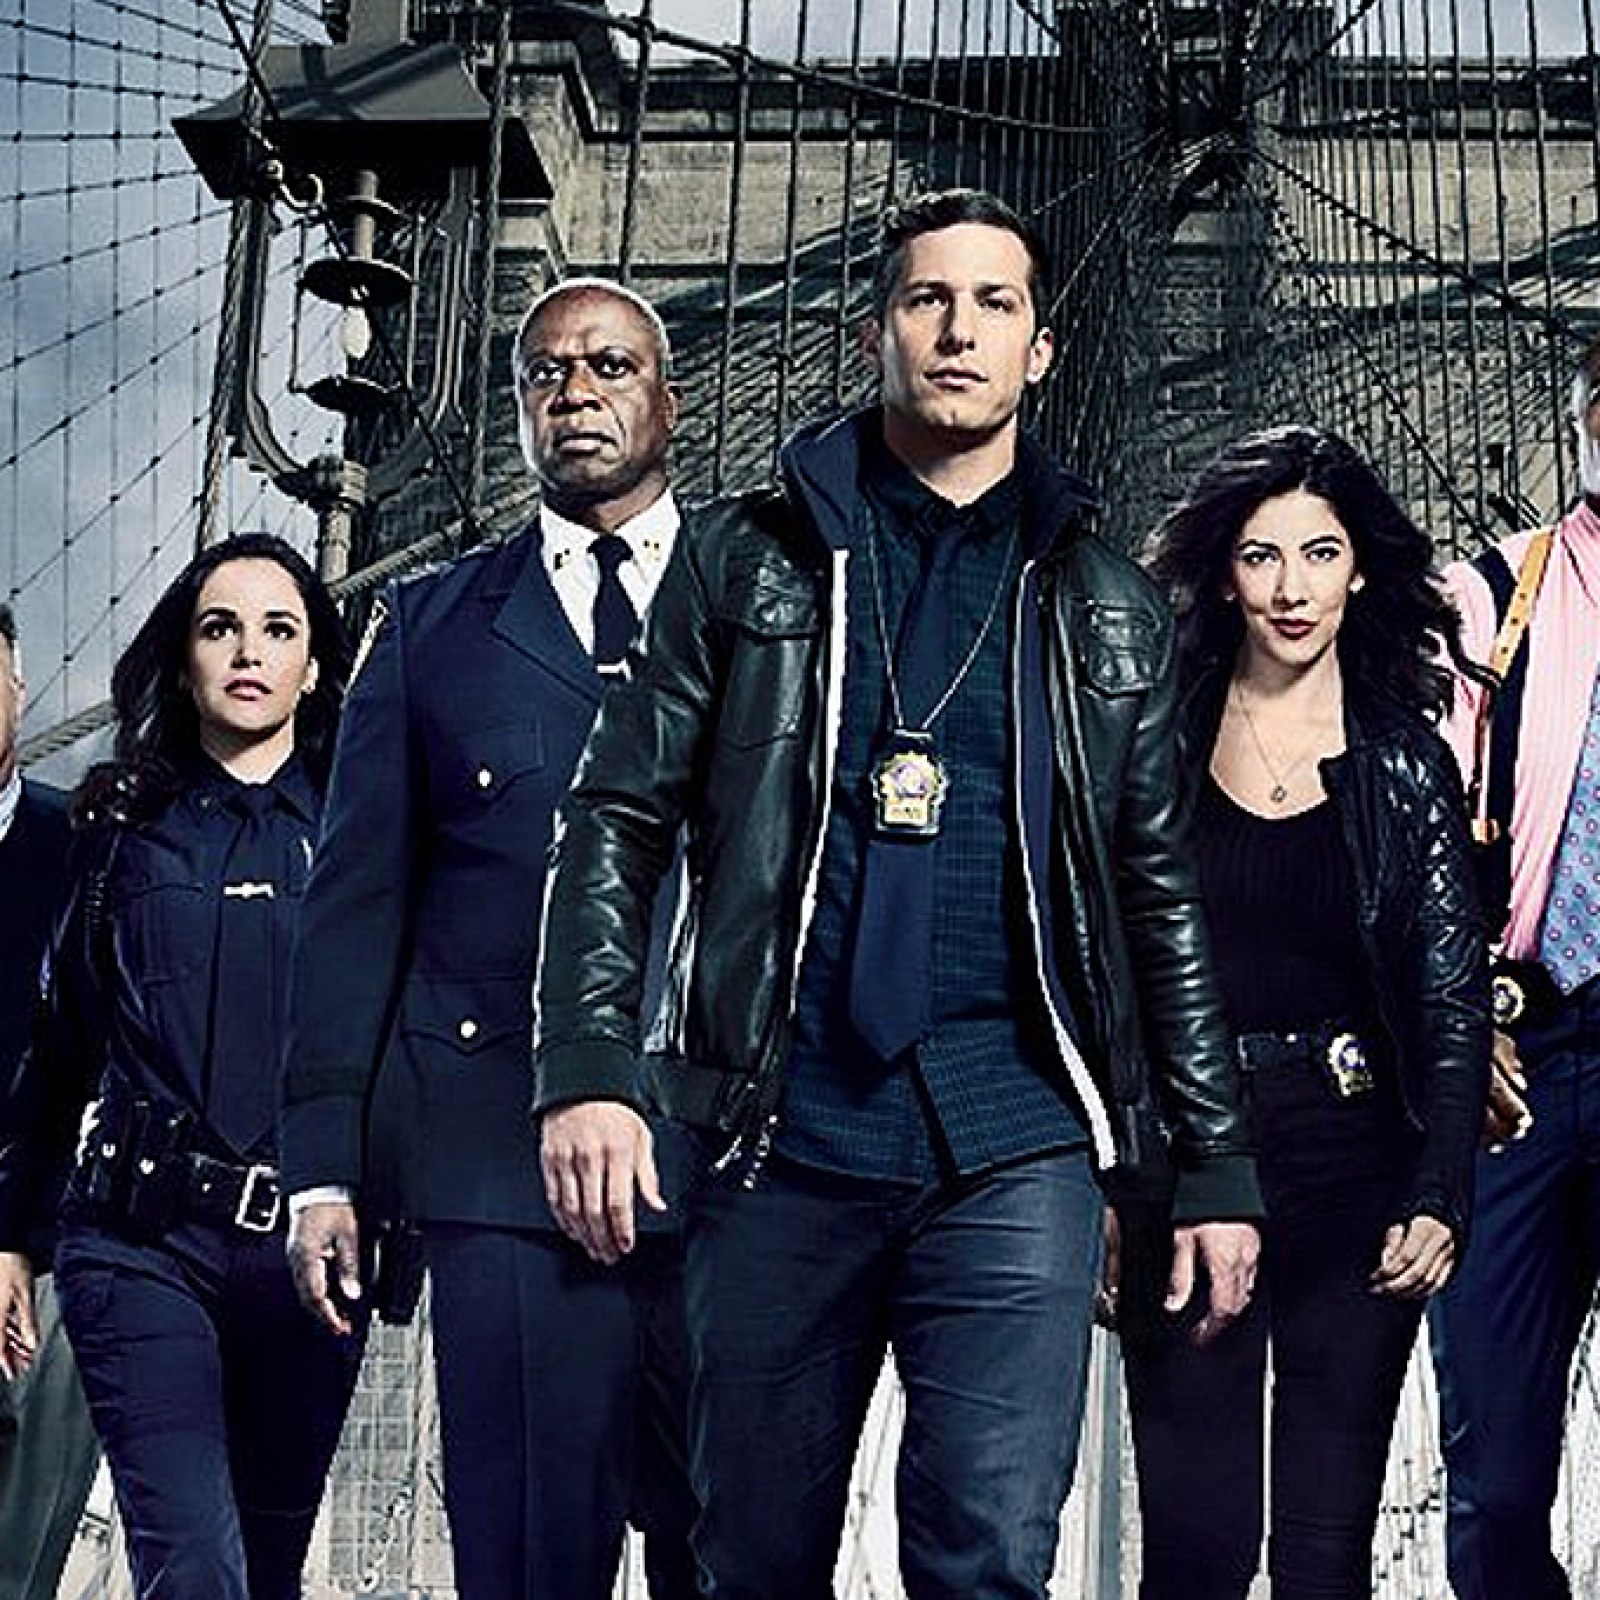 Brooklyn Nine-Nine' Season 7 Release Date, Cast, Trailer, Plot: Everything We Know About the Series